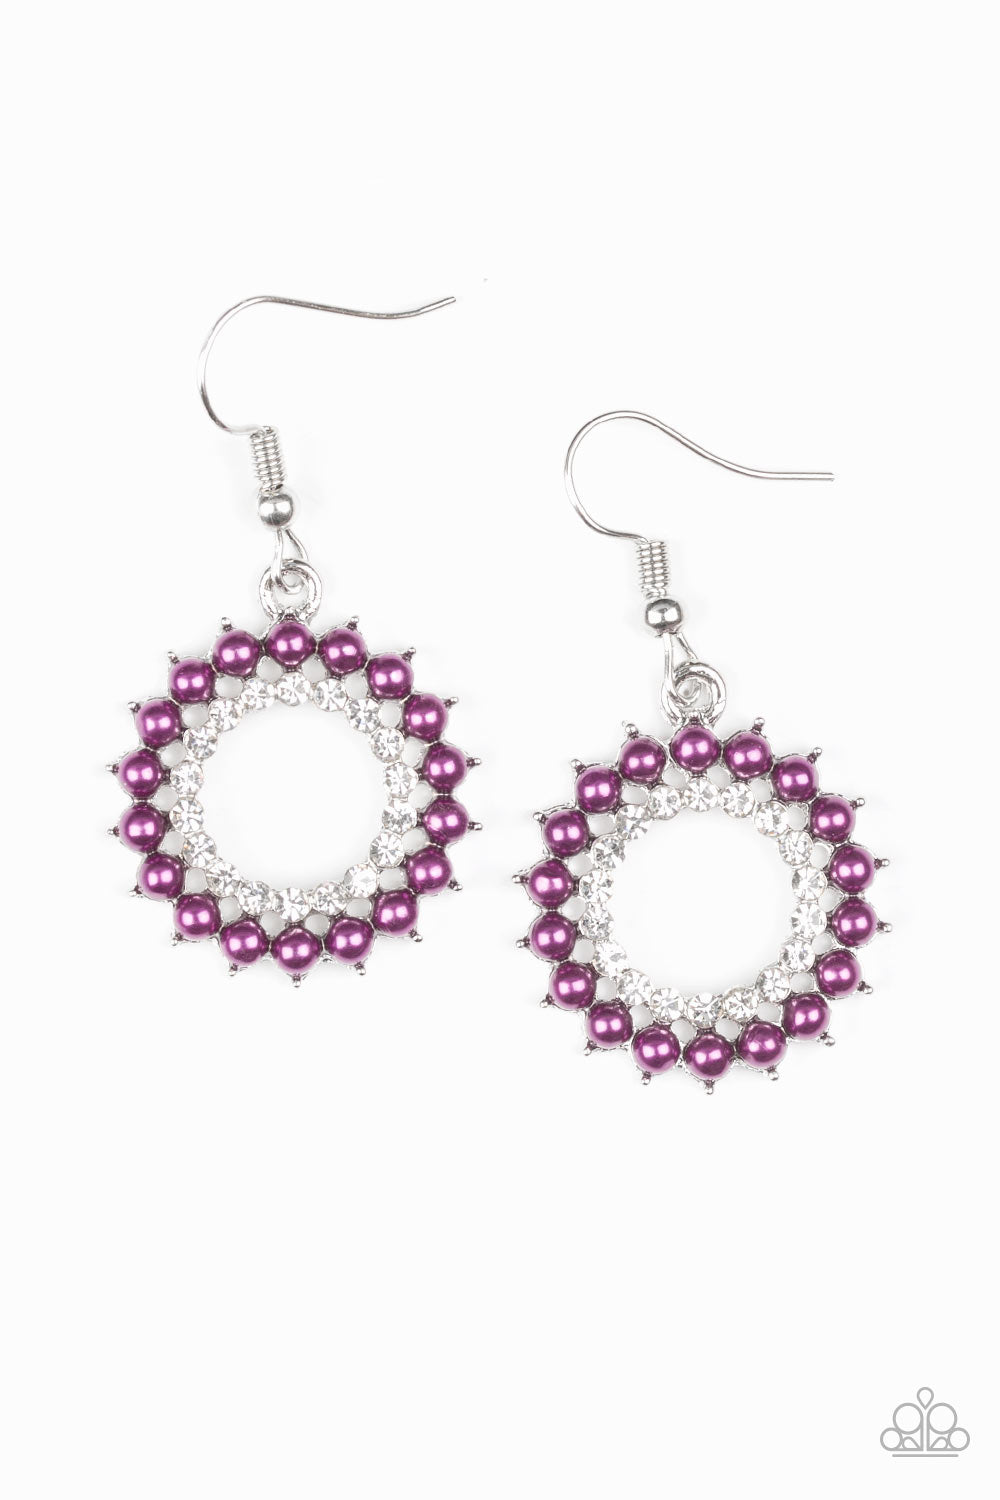 Paparazzi Accessories - Wreathed In Radiance - Purple Earrings - Alies Bling Bar